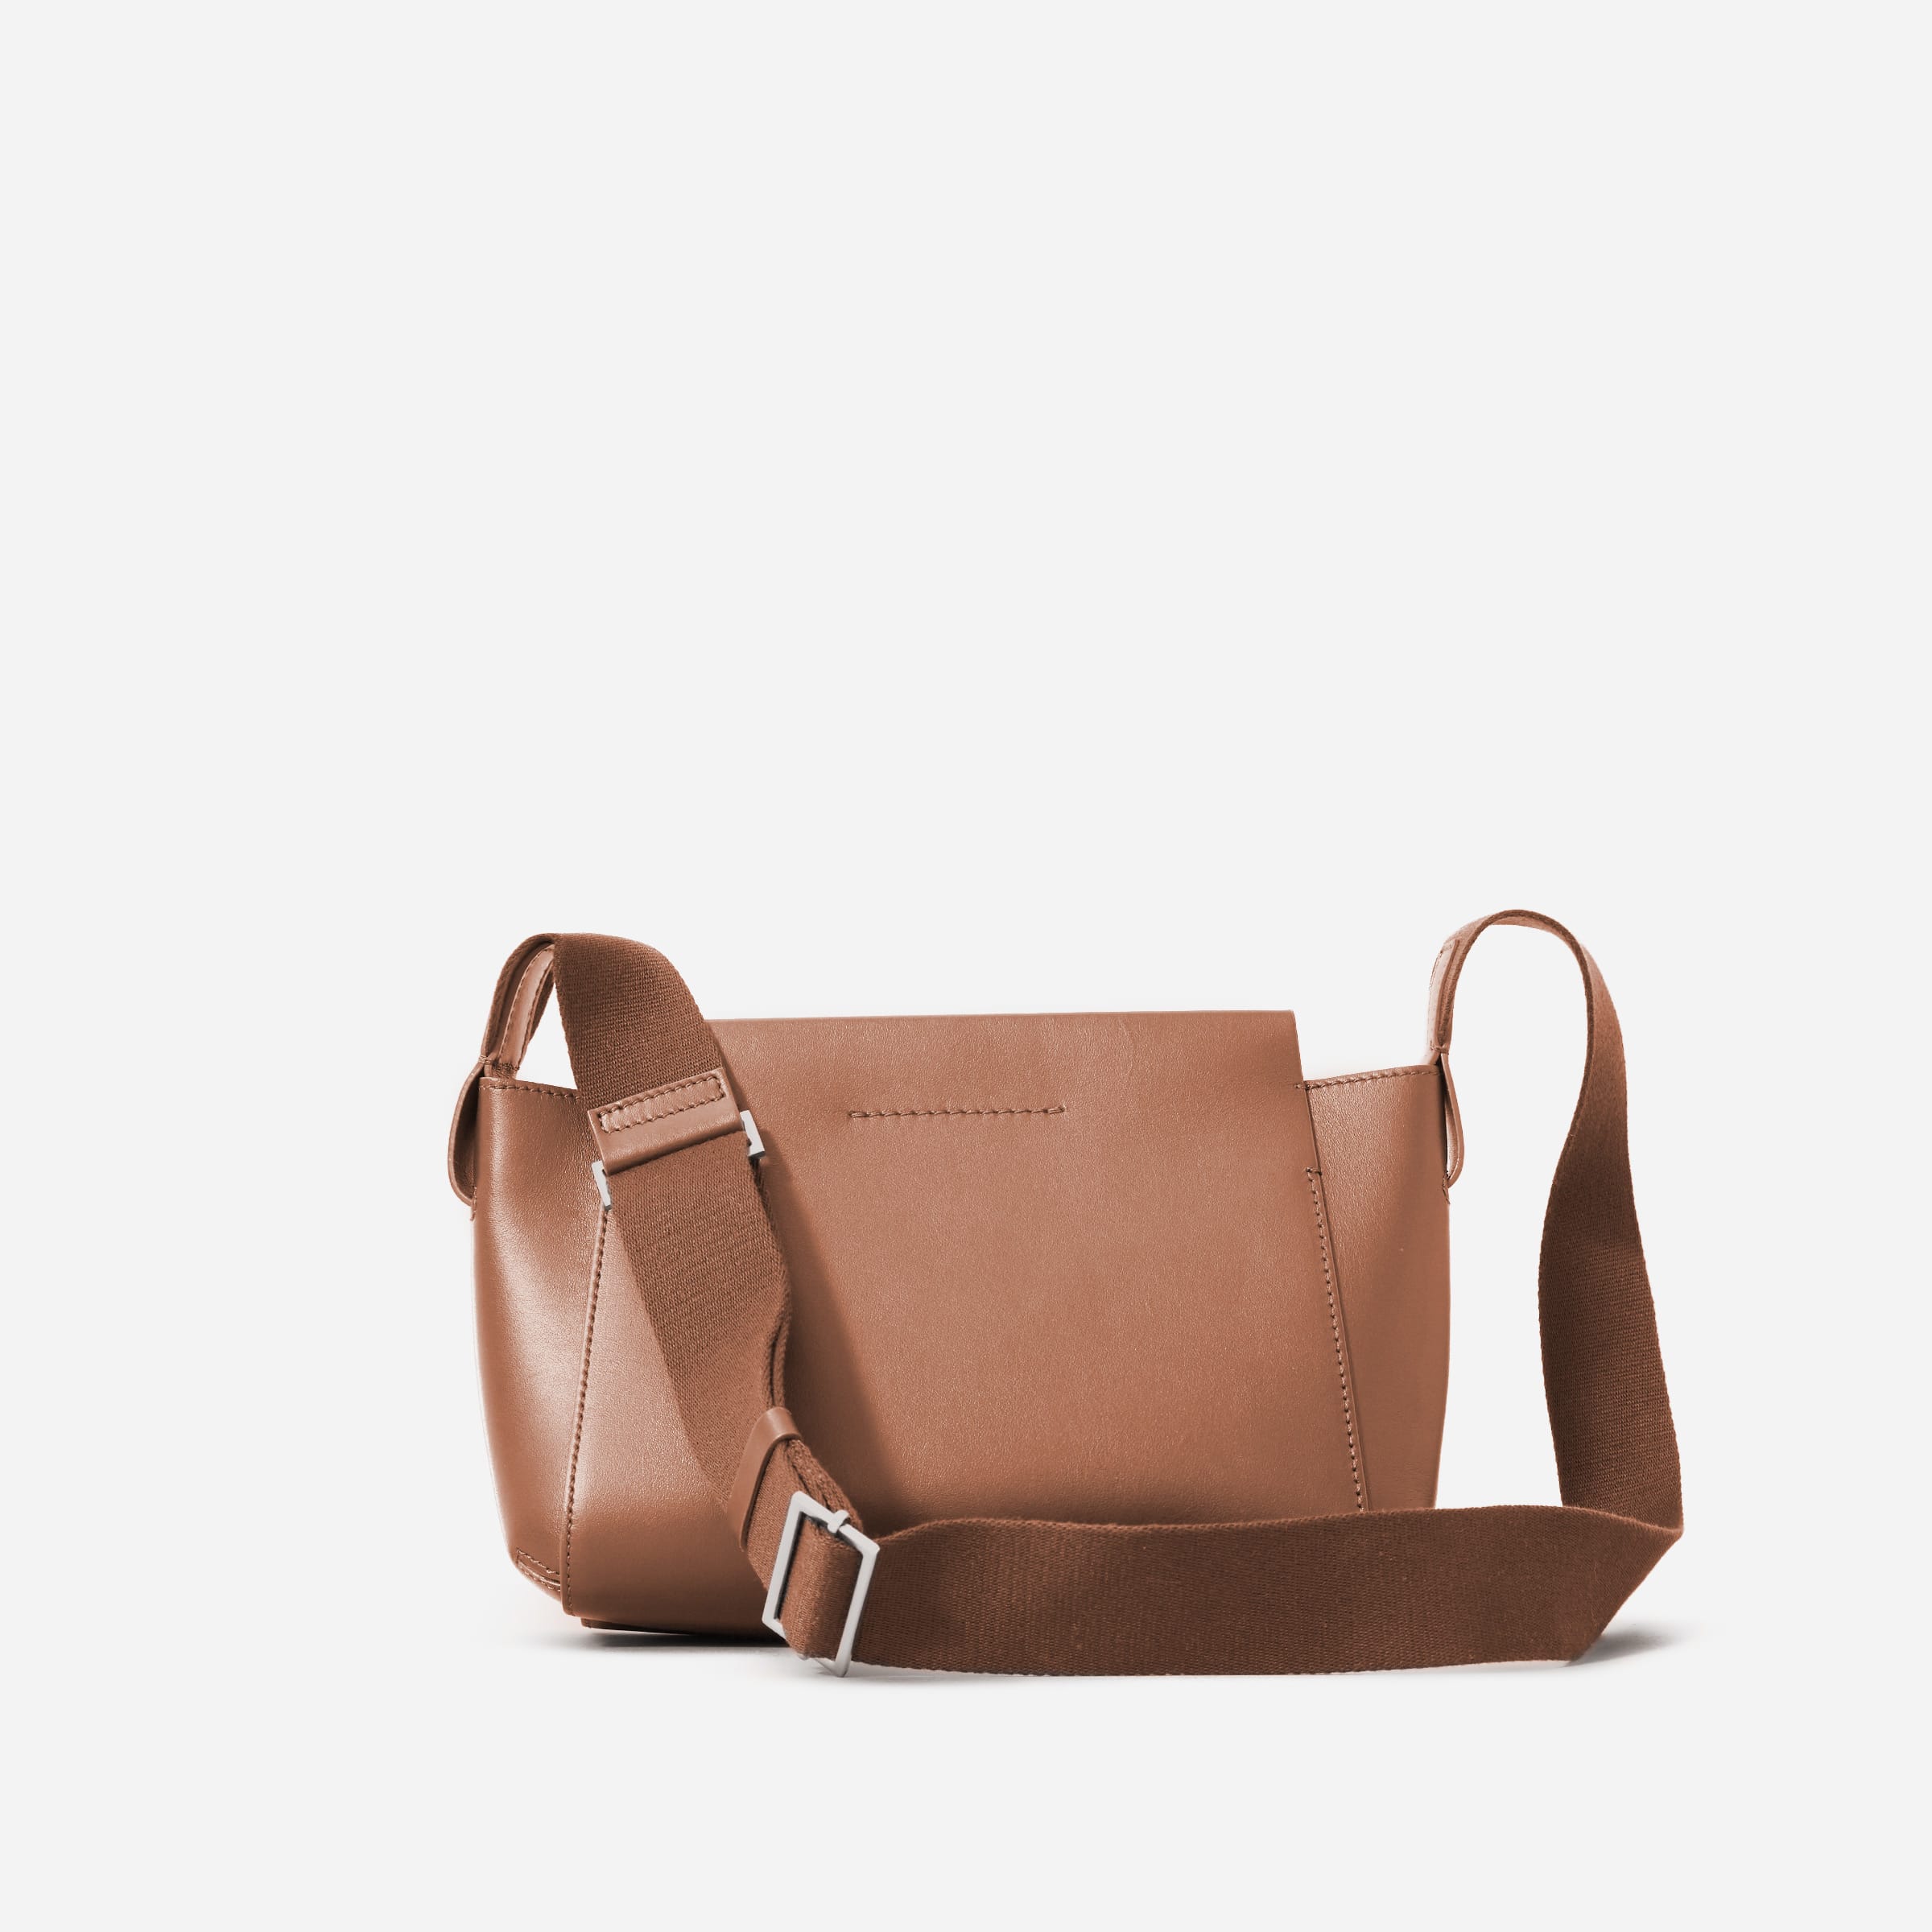 Everlane bag review — A Blog About Appreciating Quality & The Value of Less  — Fairly Curated